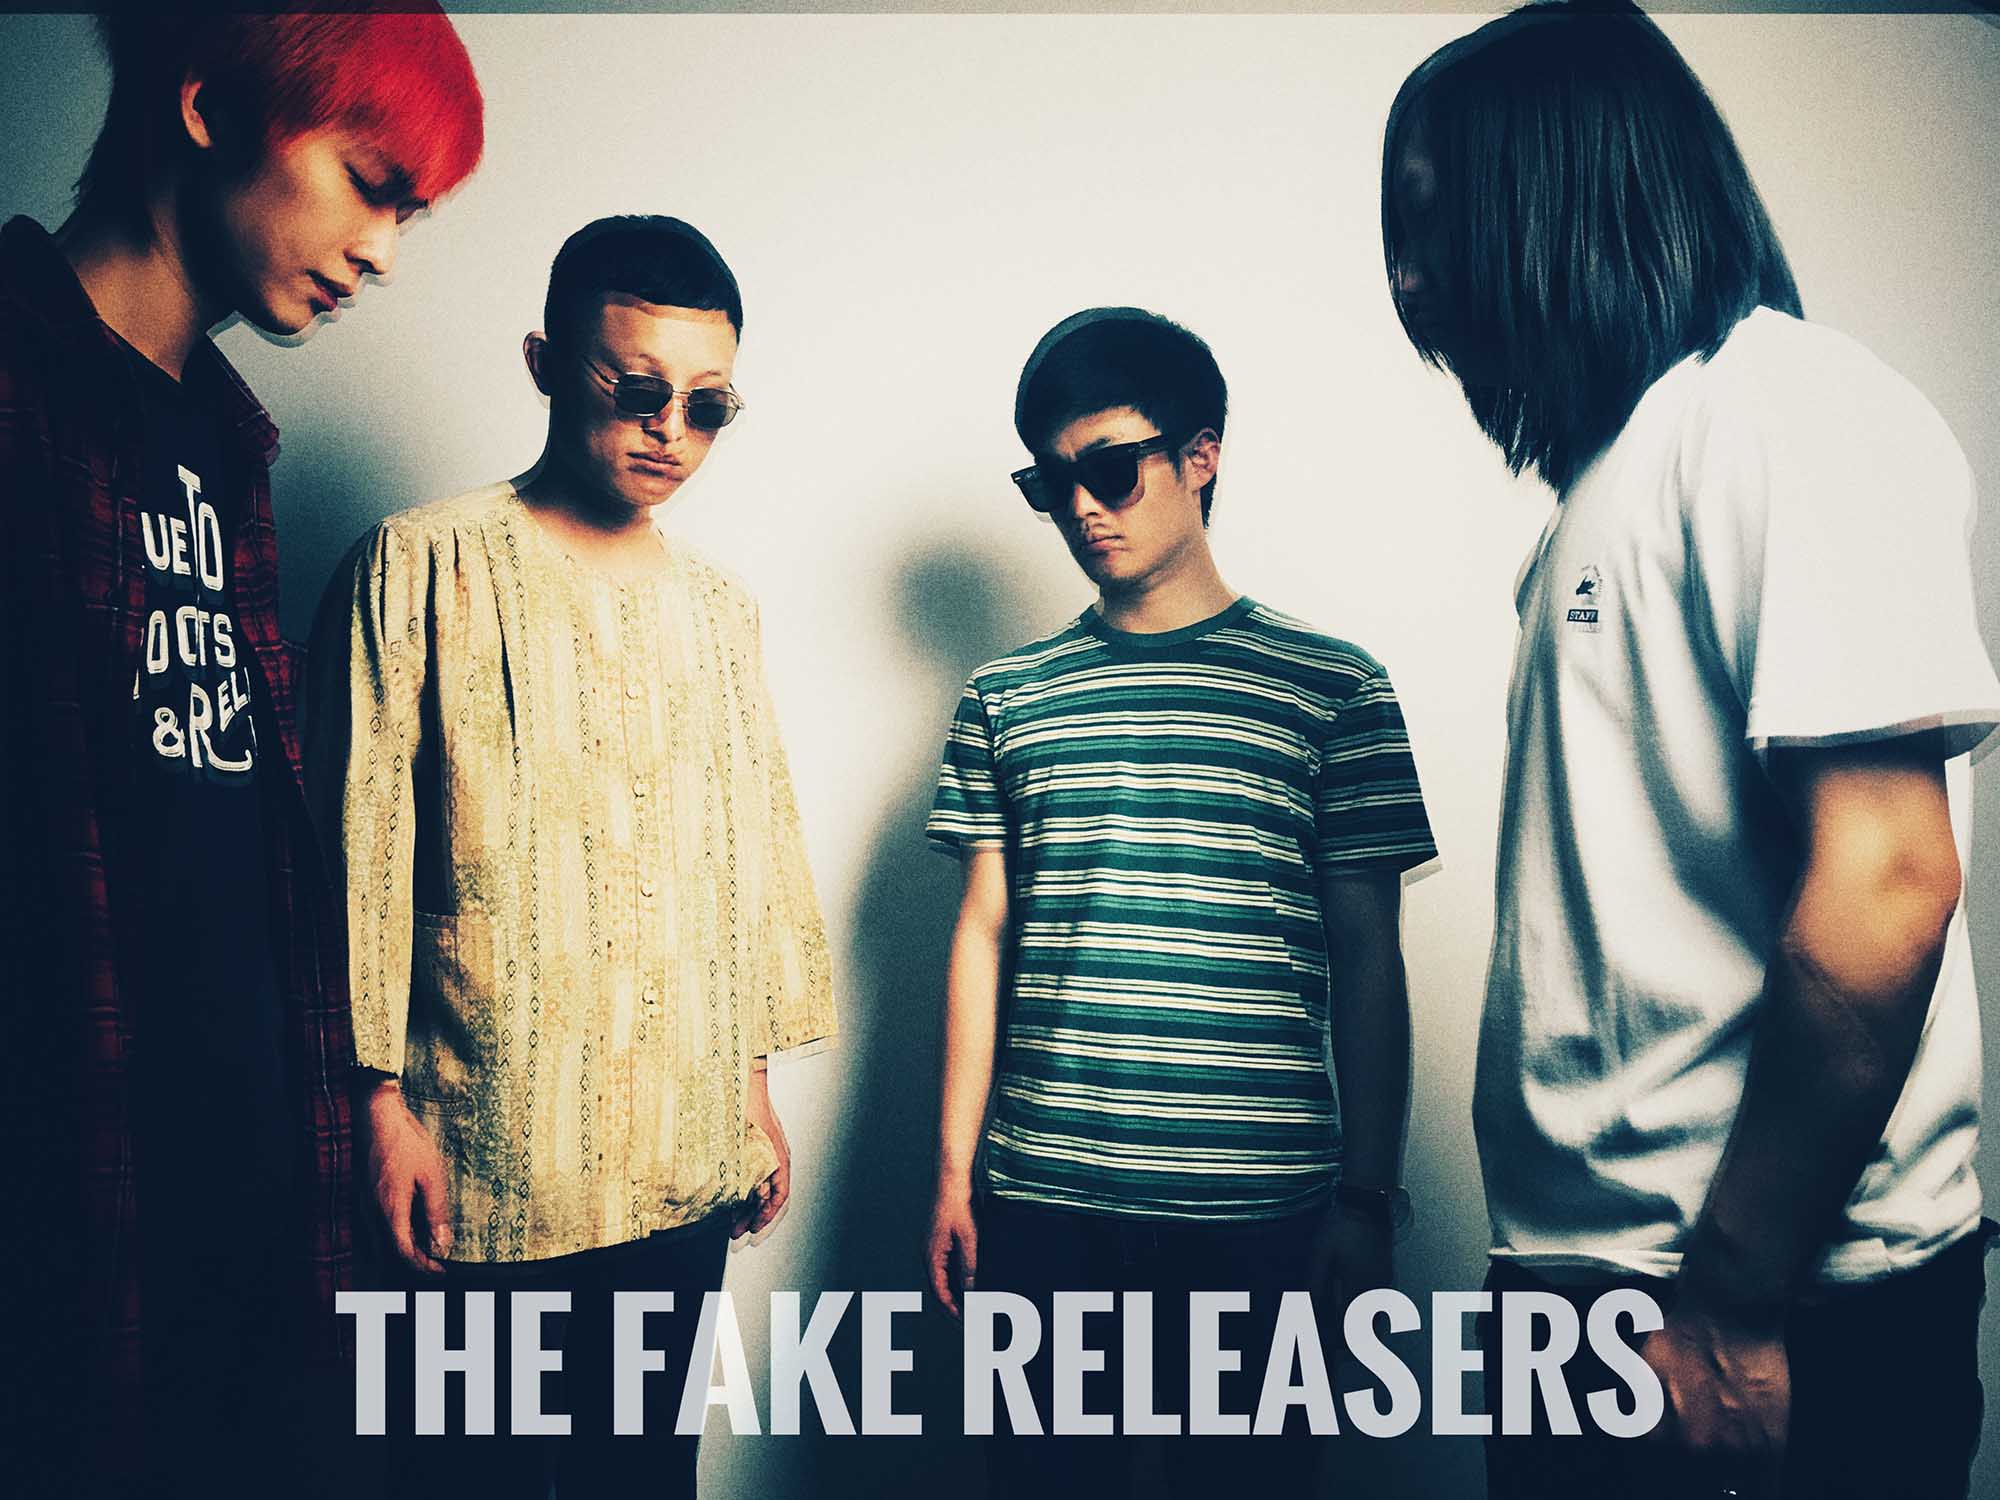 The Fake Releasers